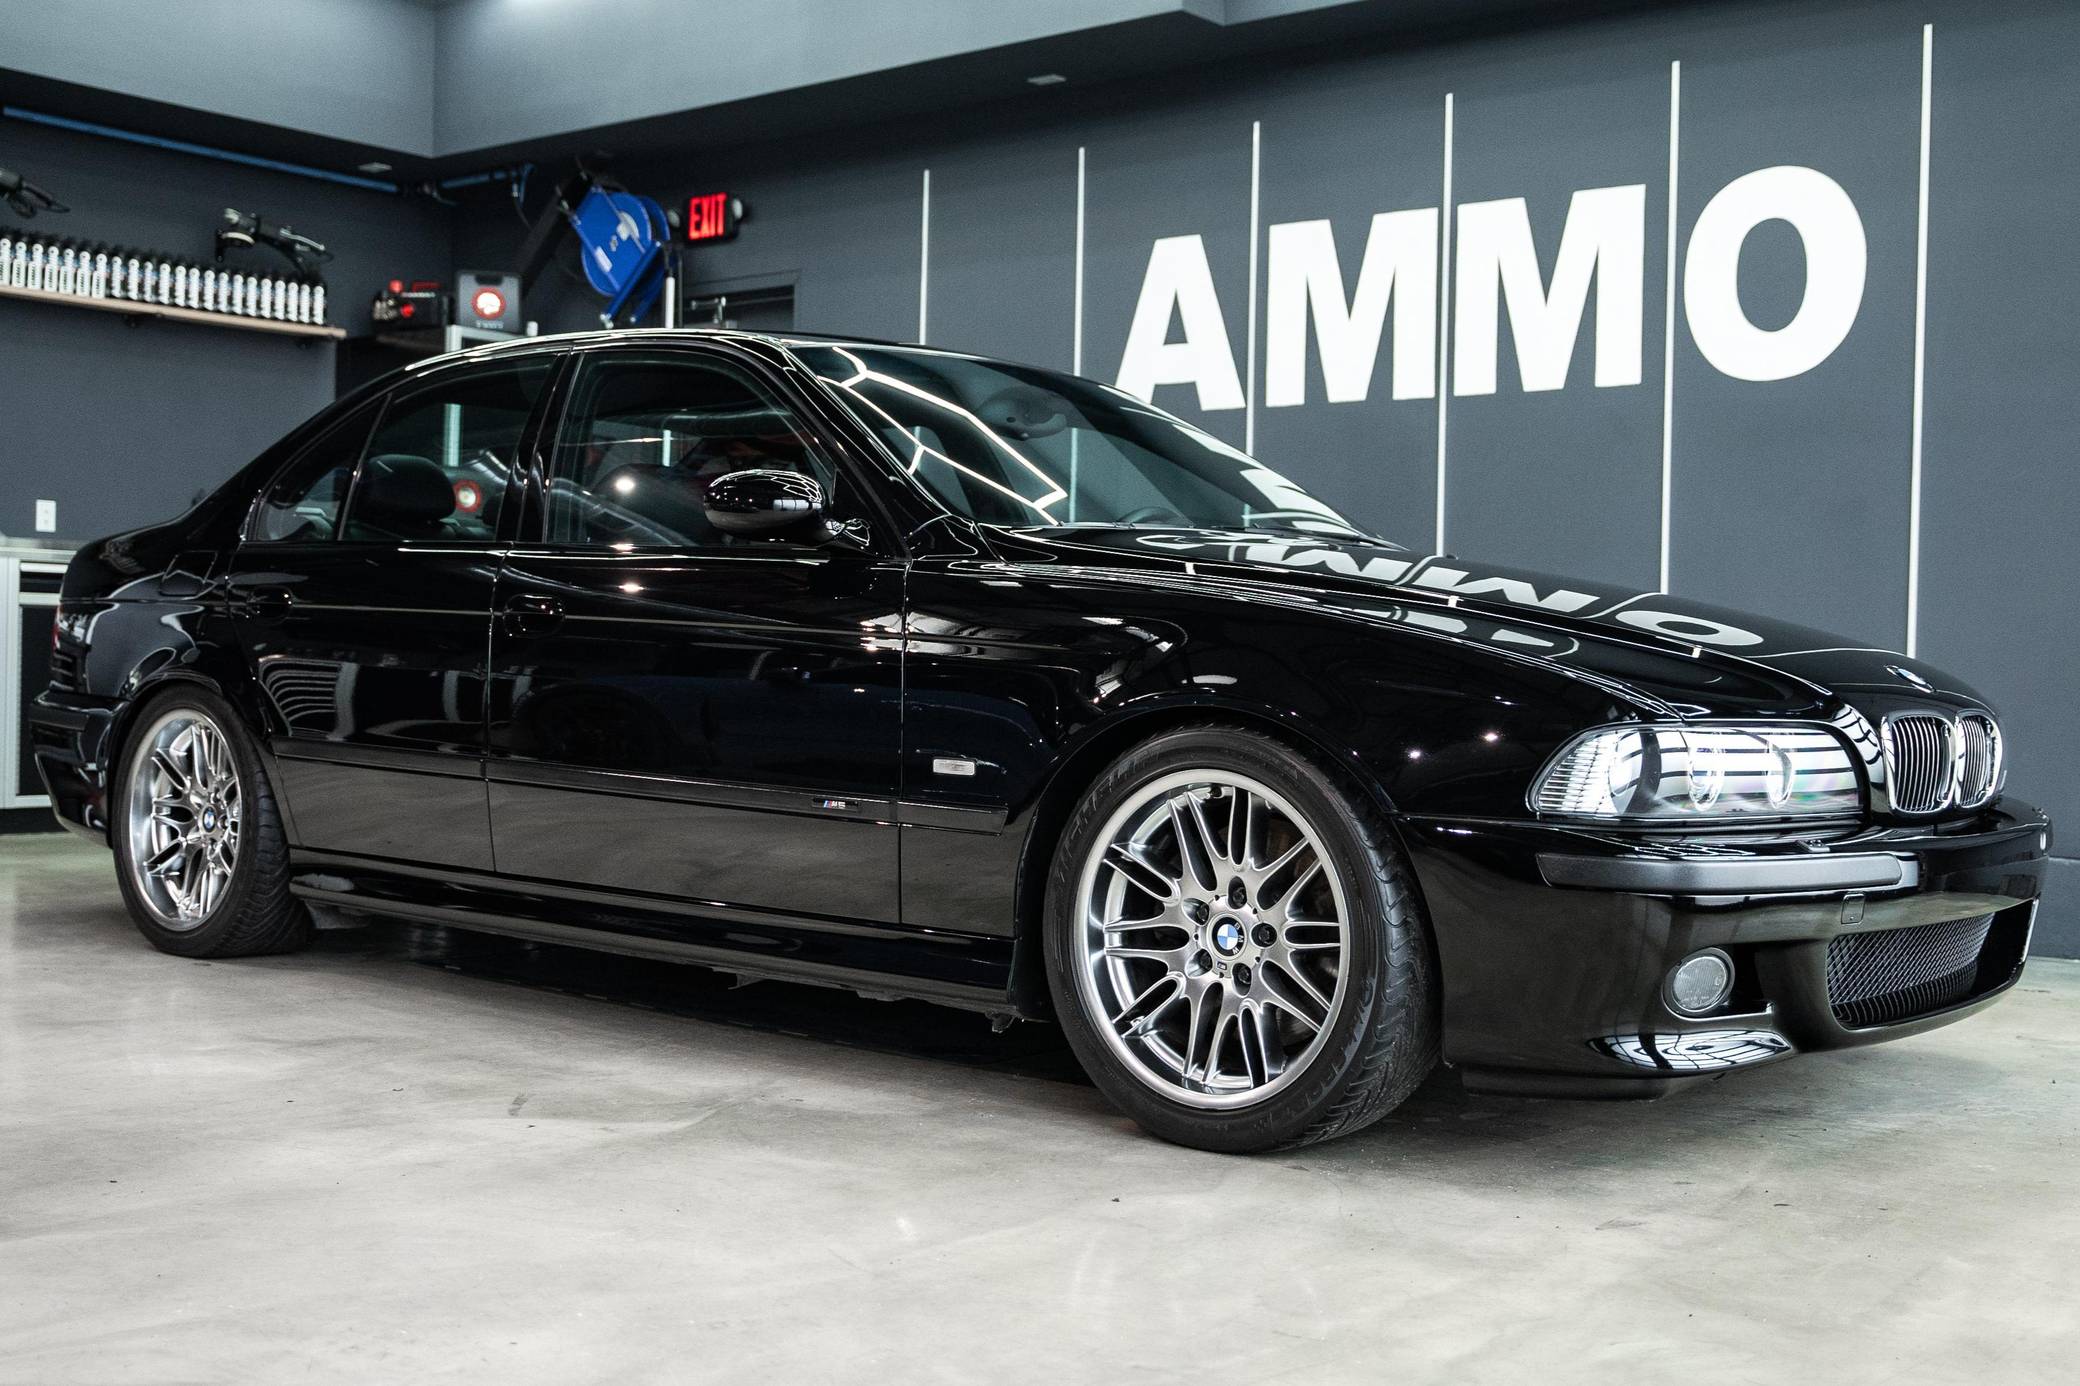 Evolution of the BMW M5 - Drive